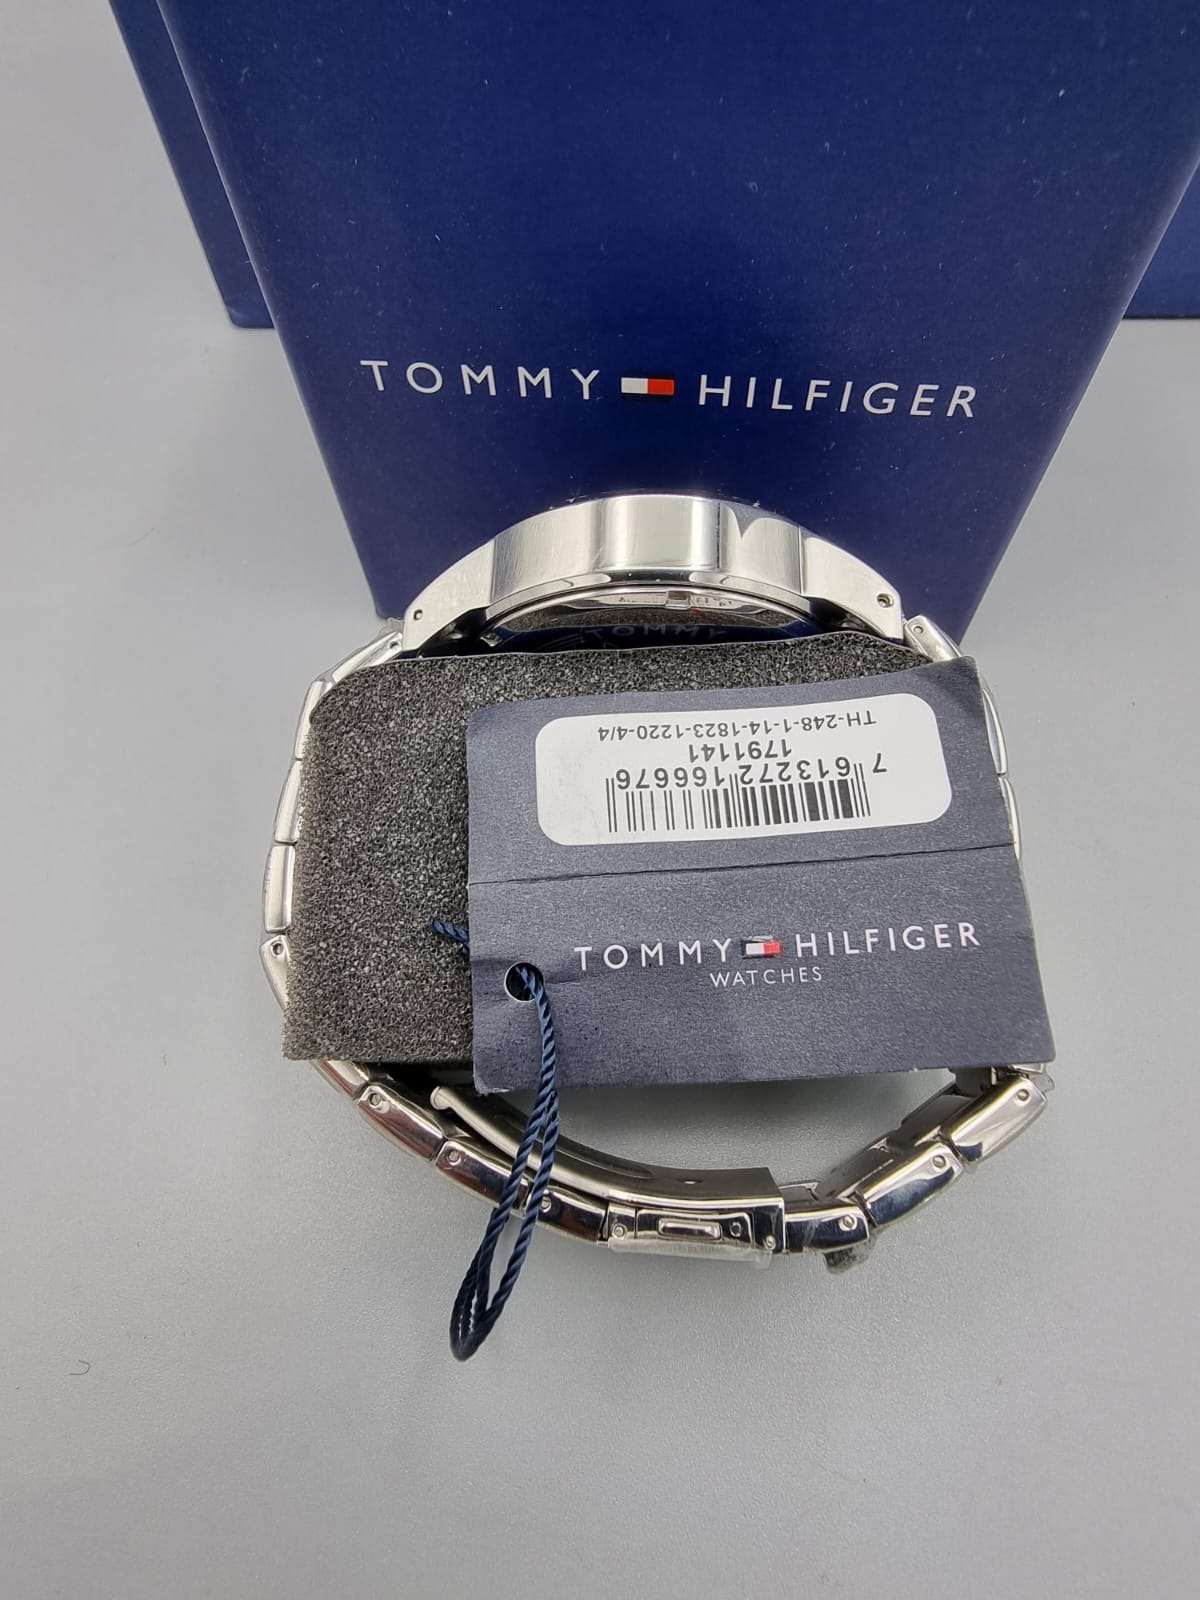 TOMMY HILFIGER Multi-Function Black Dial Stainless Steel Men's Watch 1791141